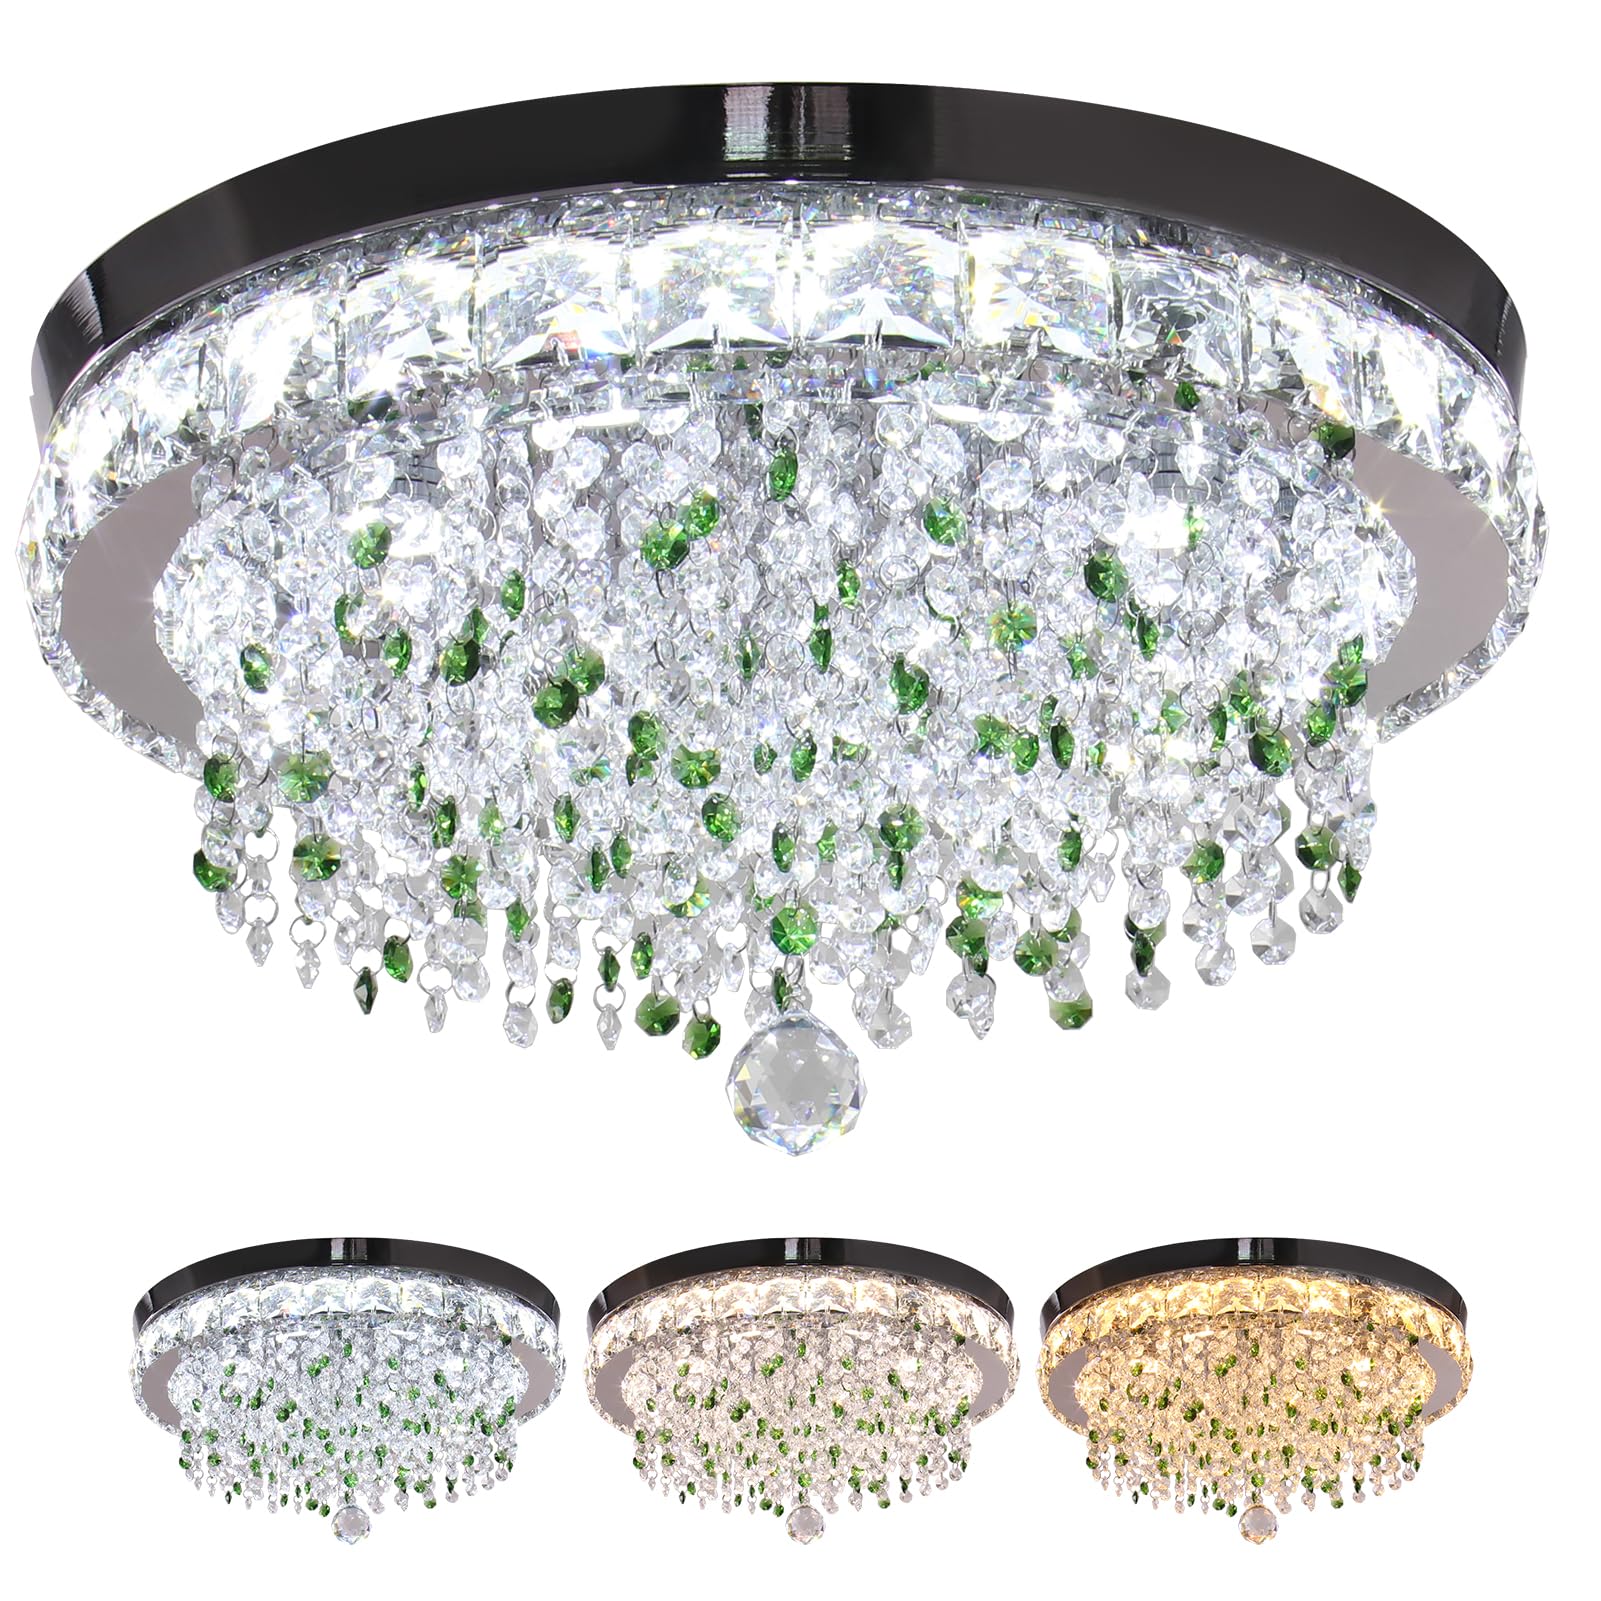 Finktonglan 18'' Crystal Chandeliers, LED Modern Ceiling Lights with Green Crystals and 8 Spotlight 2500K/4000K/6500K Changeable Color Flush Mount Chandeliers for Bedrooms Living Room